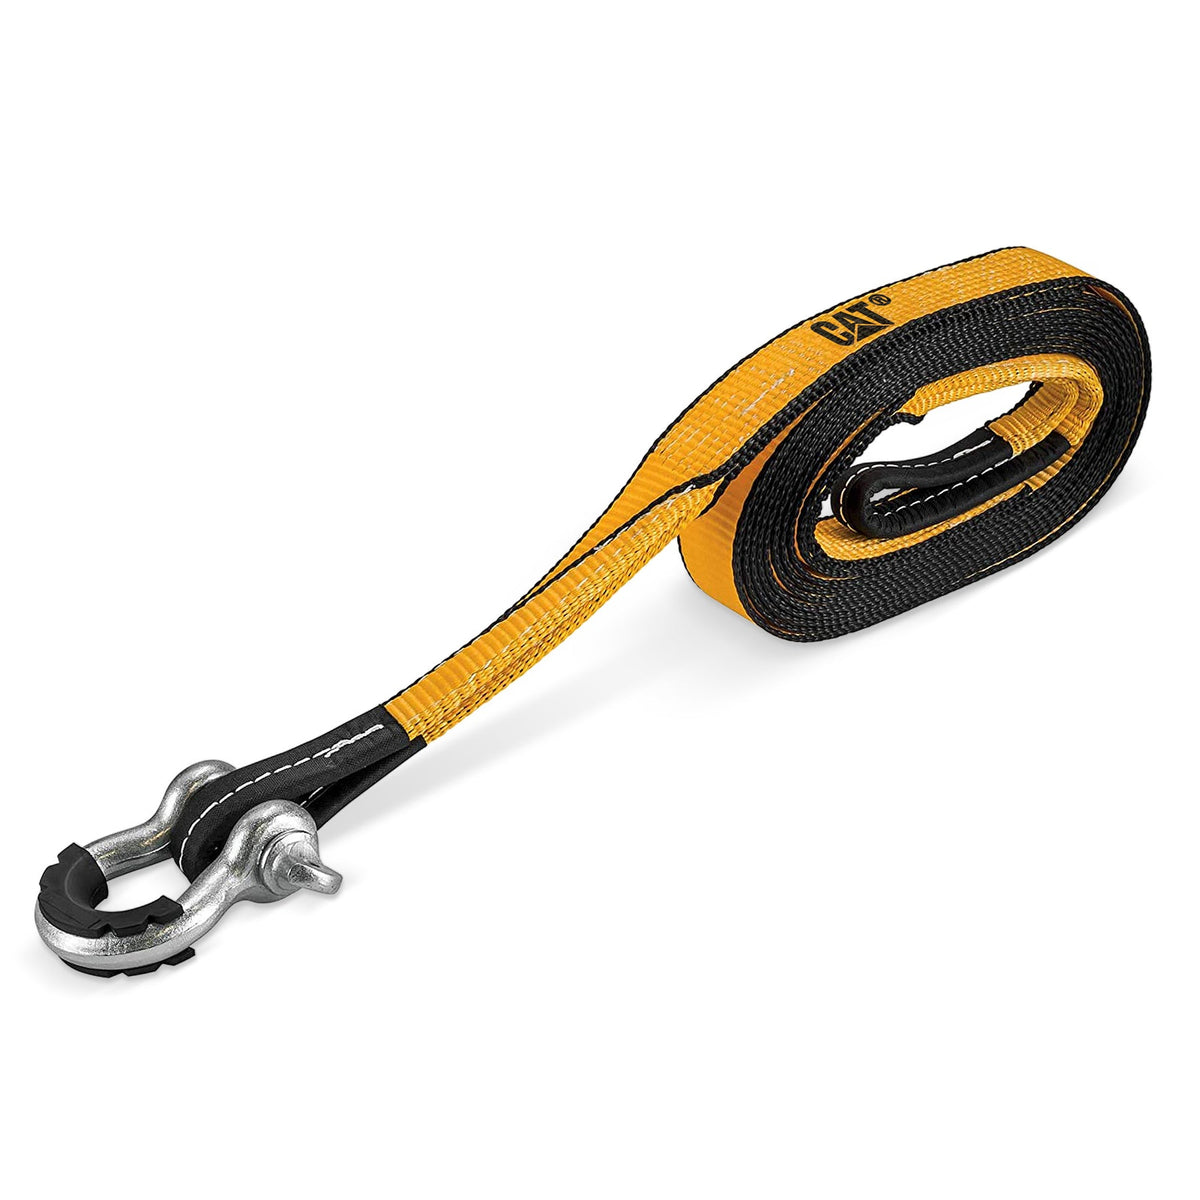 CAT Tow Strap w/ D-Ring Shackle - 9,000lb Capacity - 240029